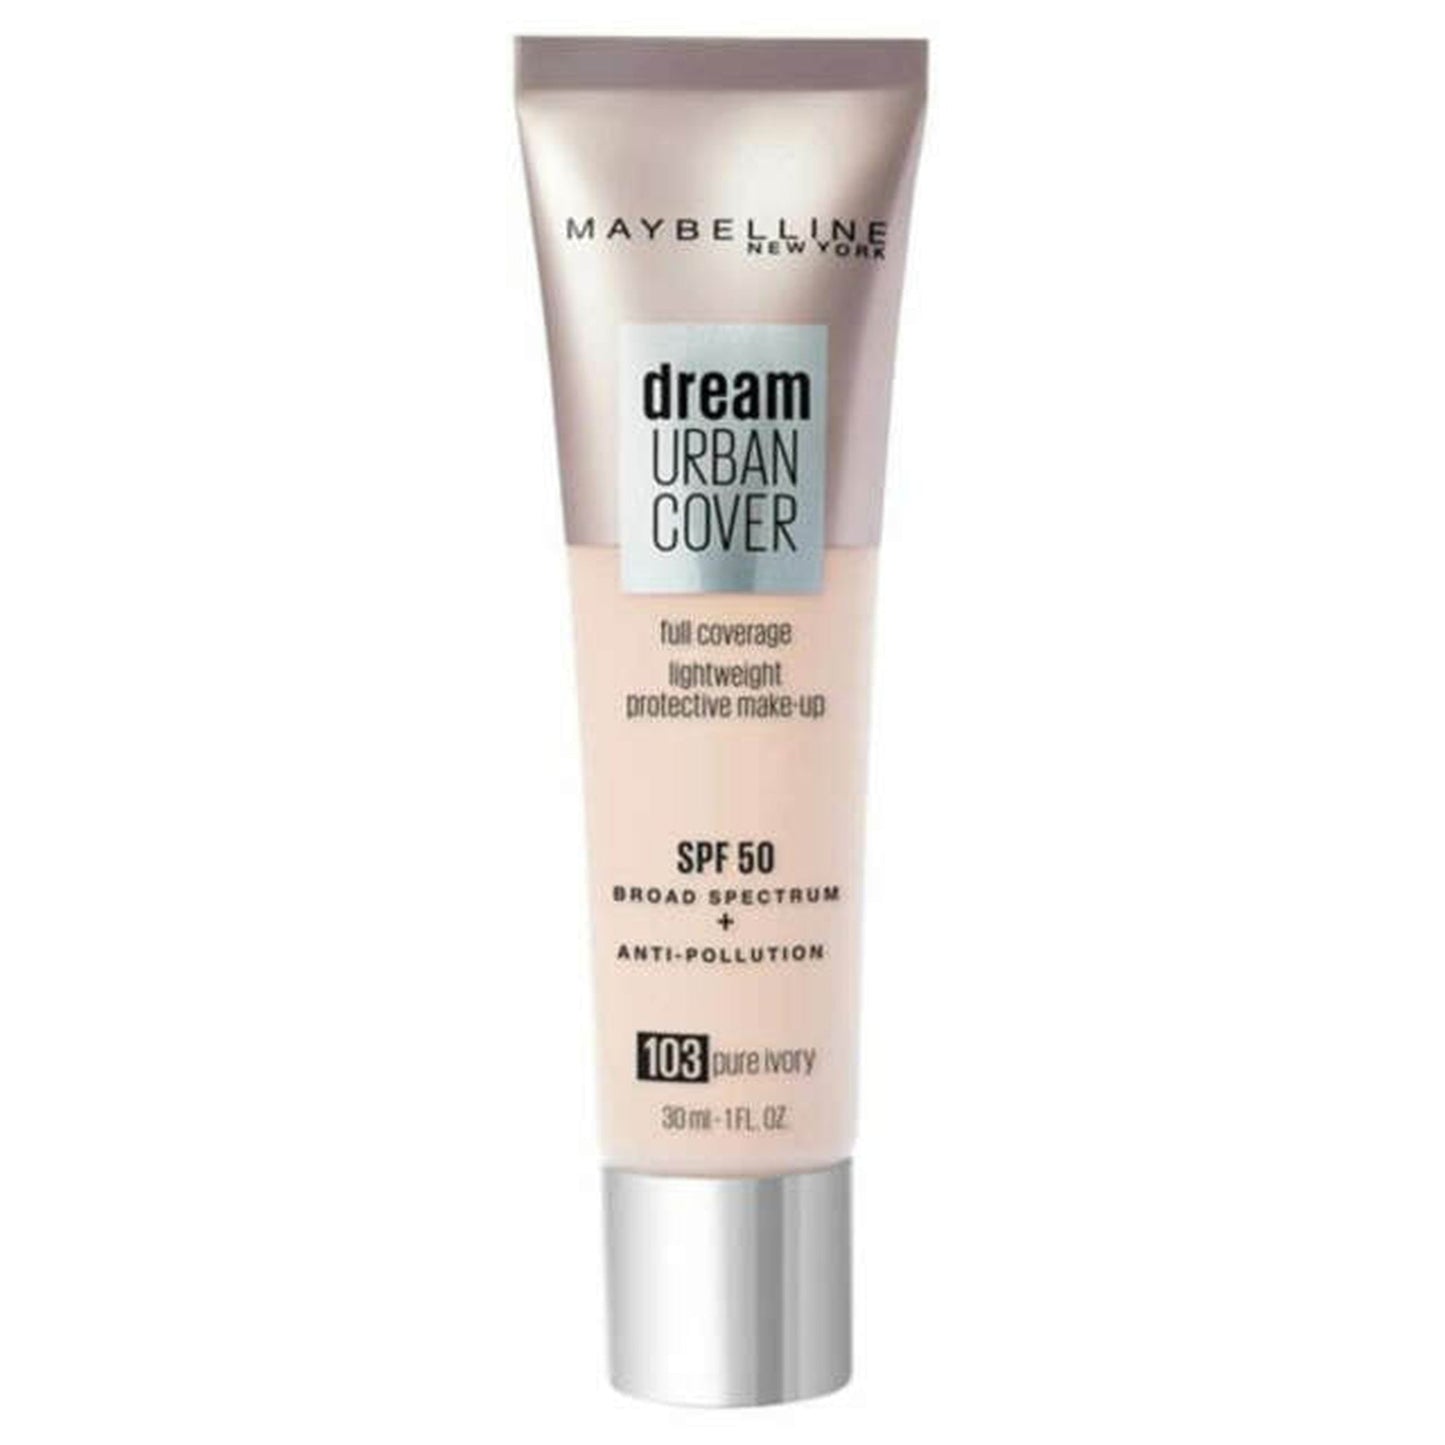 Maybeline Dream Urban Cover Foundation SPF50 - 103 Pure Ivory-Maybelline-BeautyNmakeup.co.uk